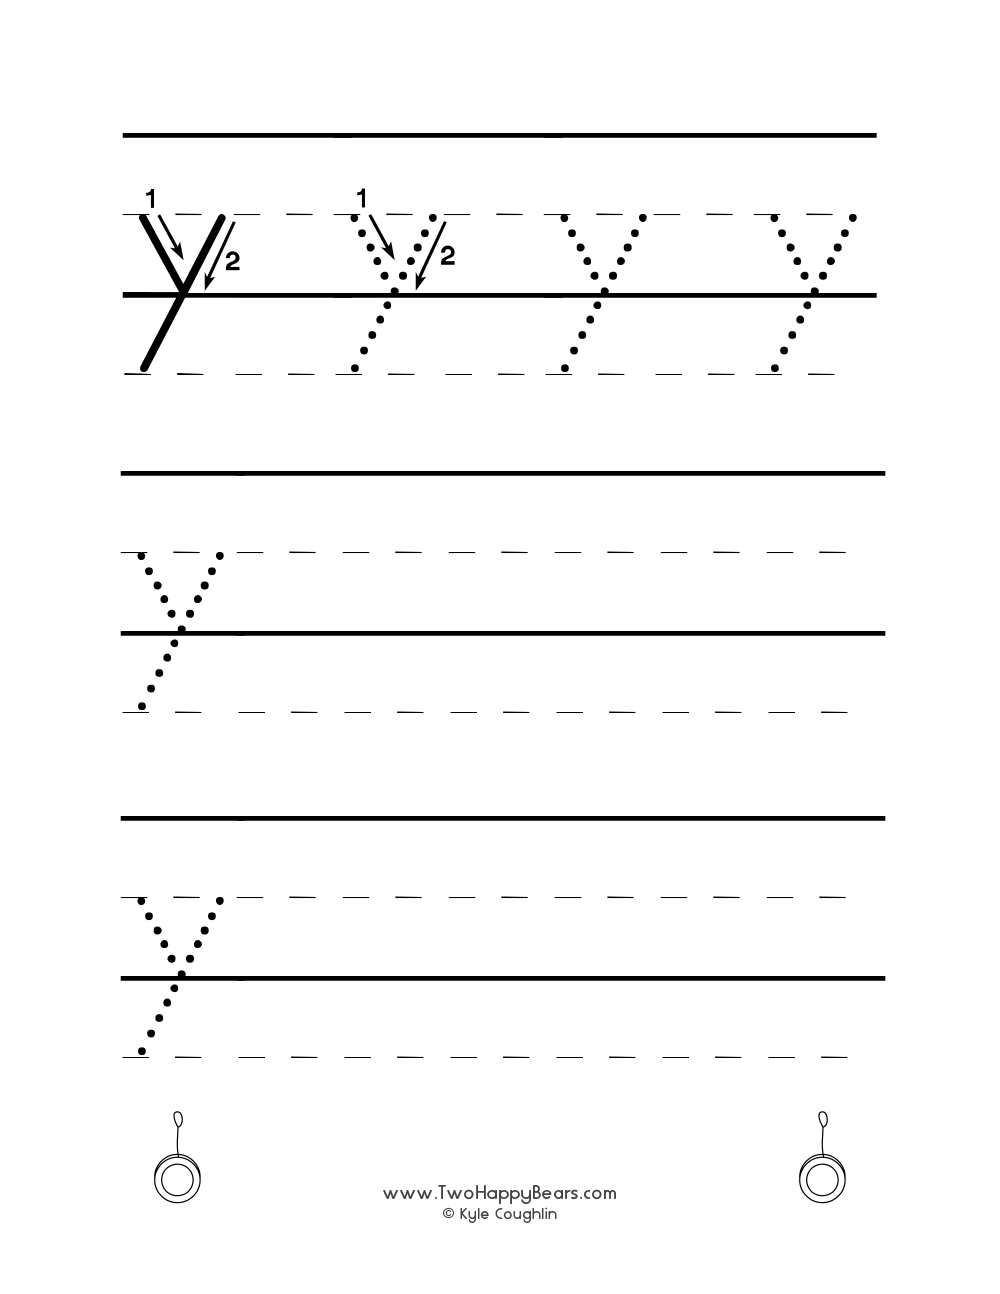 Lowercase letter Y worksheet for tracing and drawing